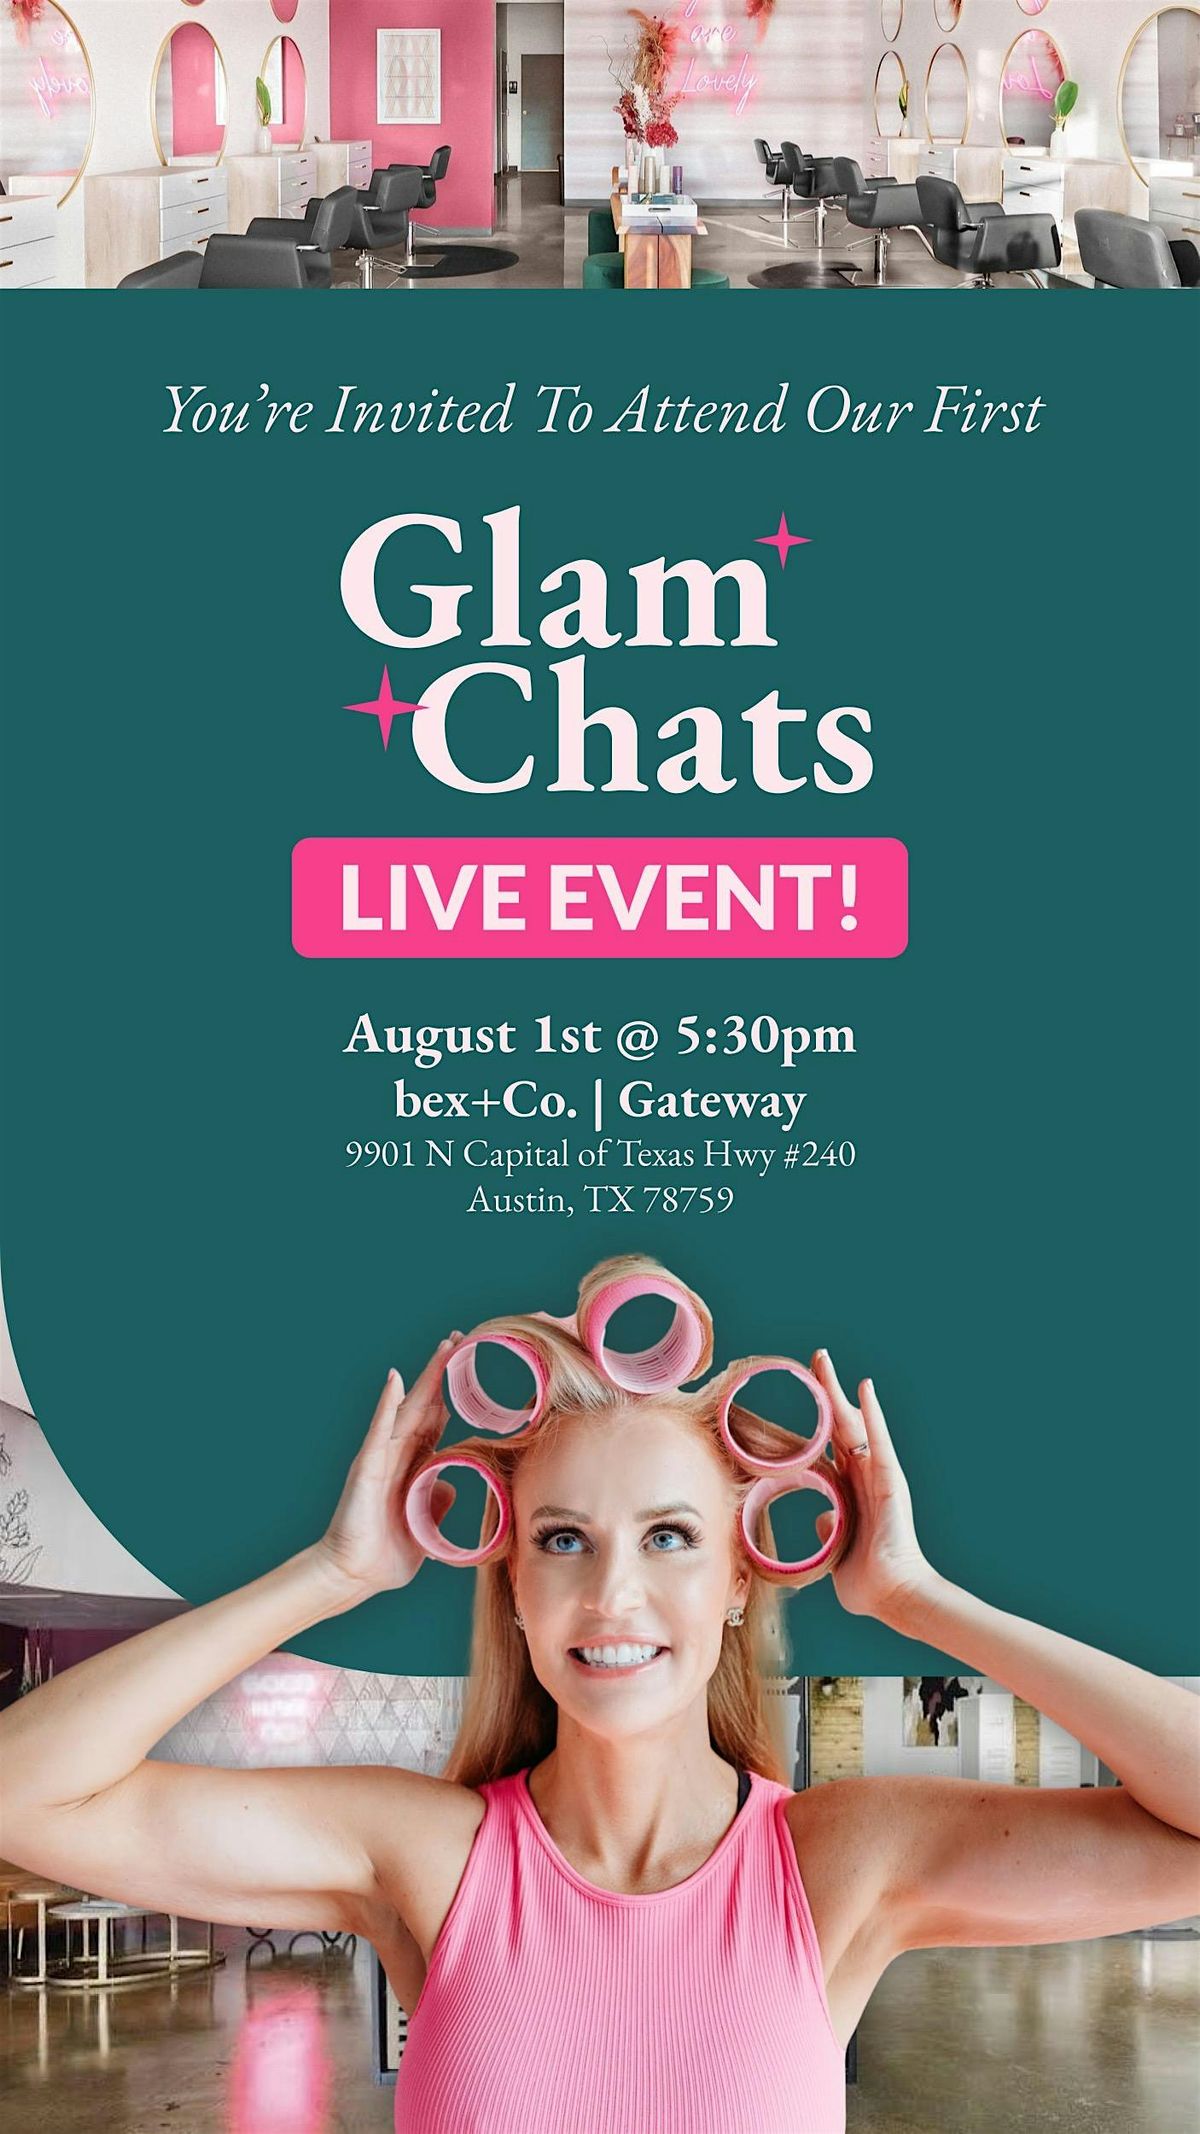 Glam Chats Live